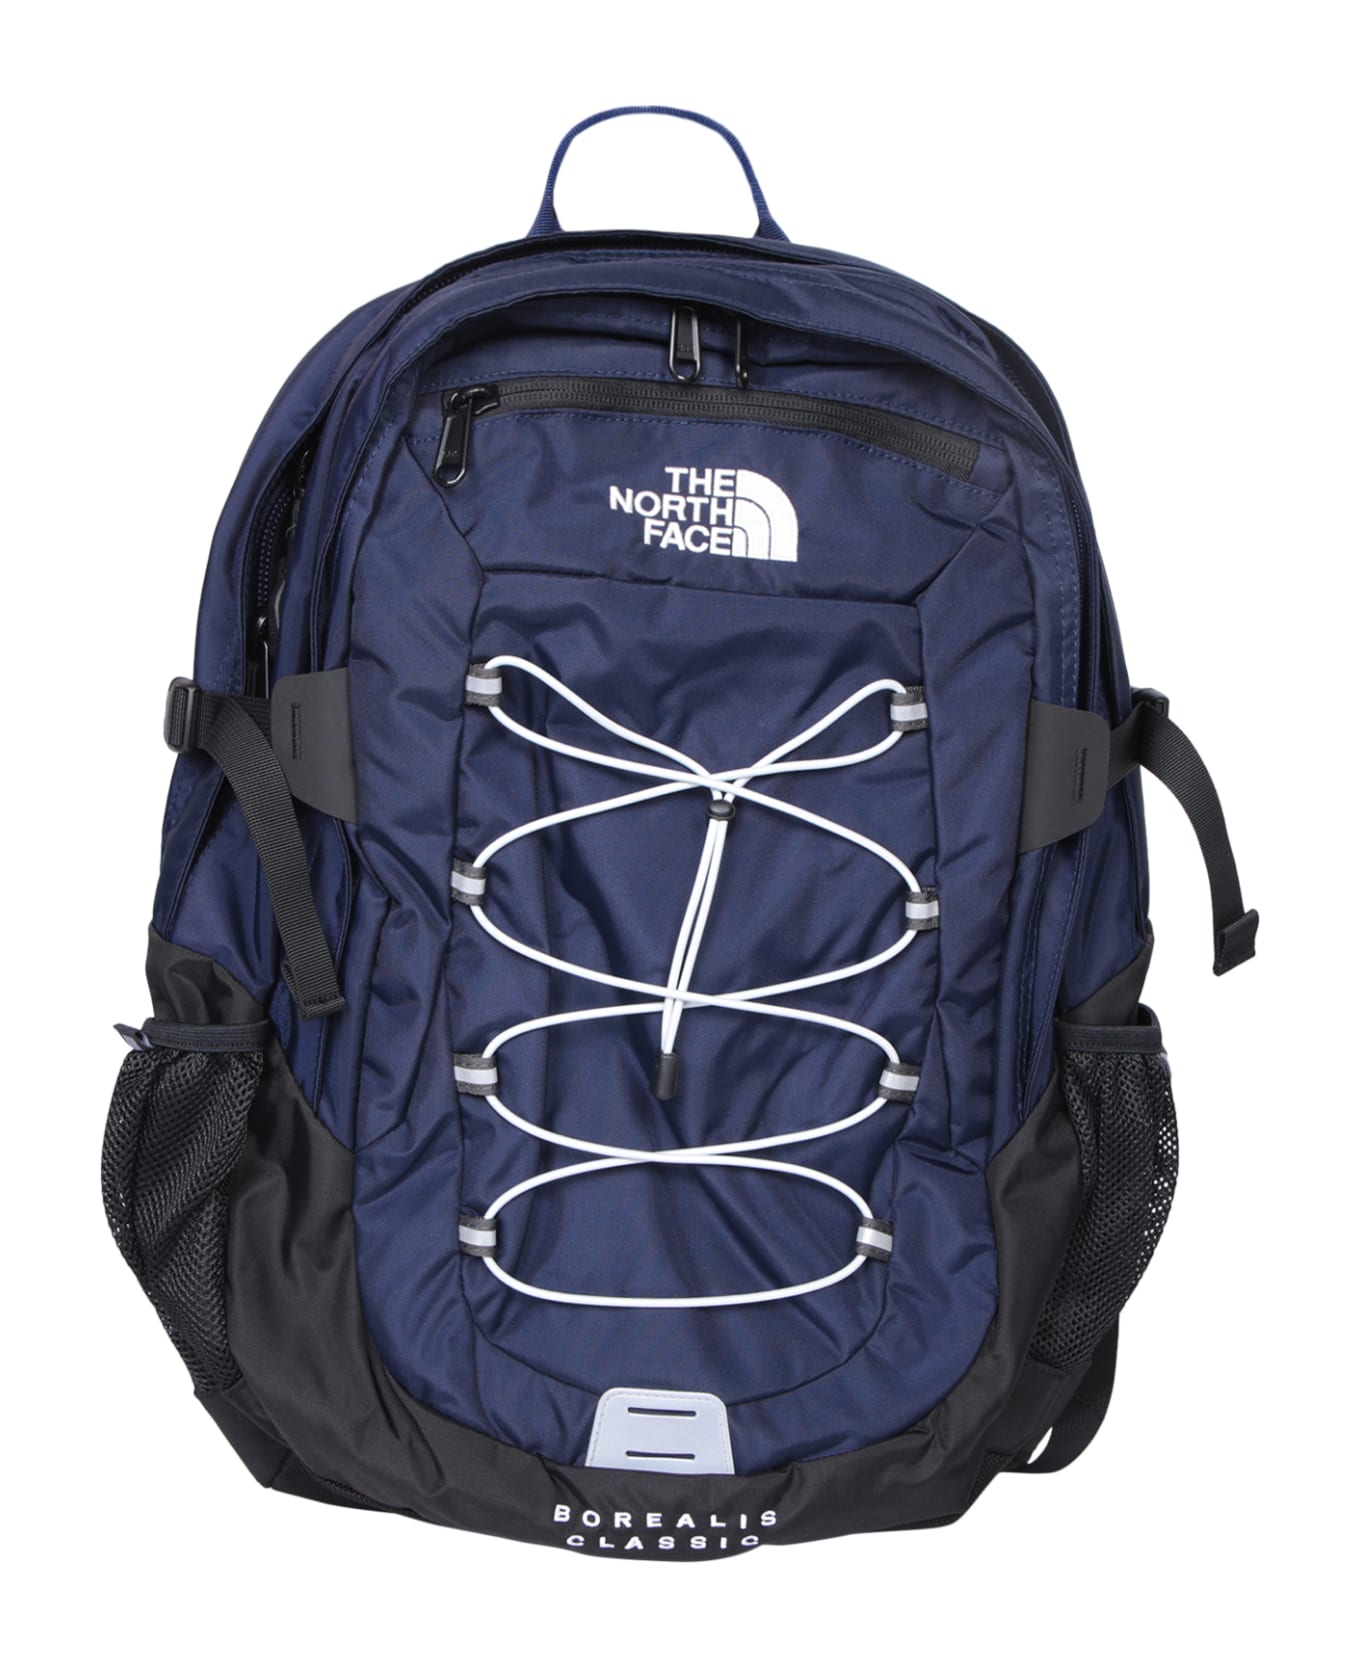 The North Face Borealis Blue Backpack - Blue